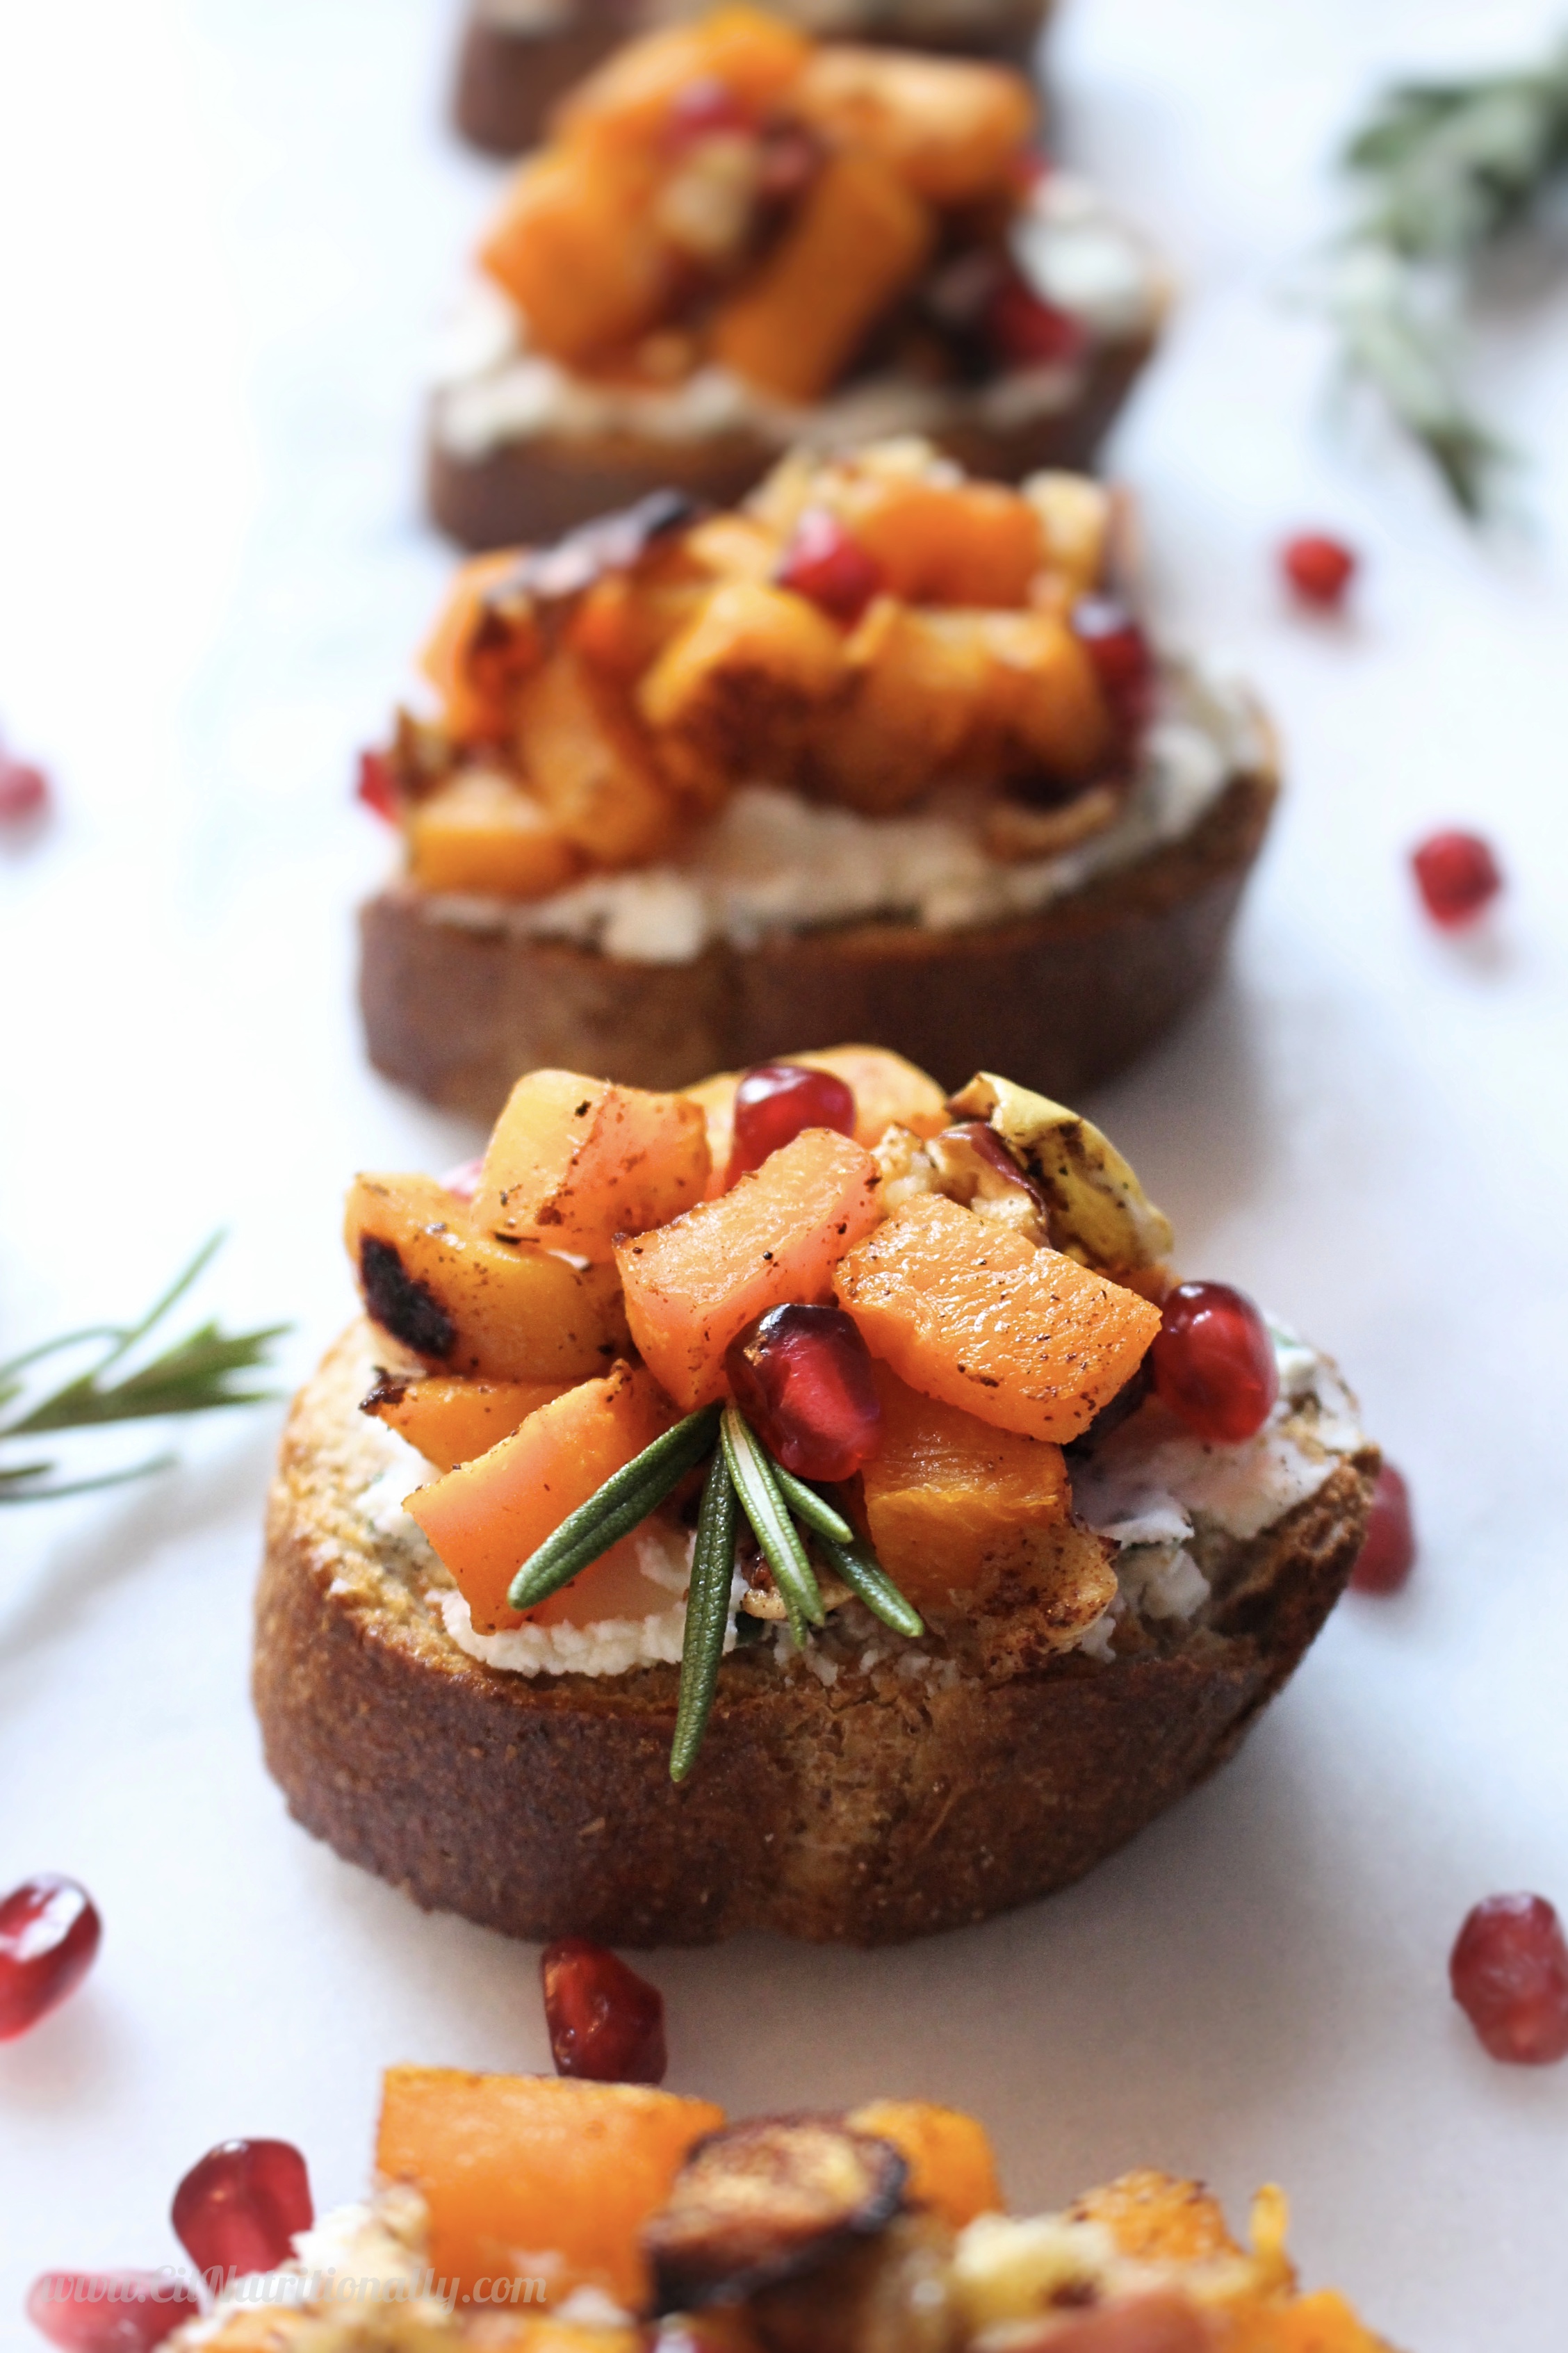 [AD] Roasted Butternut Squash and Herbed Goat Cheese Crostini | C it Nutritionally These Roasted Butternut Squash and Pomegranate Crostini are the perfect fall appetizer to help you entertain for the holidays! Enjoy perfectly caramelized butternut squash and apples, creamy goat cheese with fresh herbs and a sprinkle of pomegranate arils. Vegetarian, Gluten Free option, Egg Free, Soy Free, Nut Free